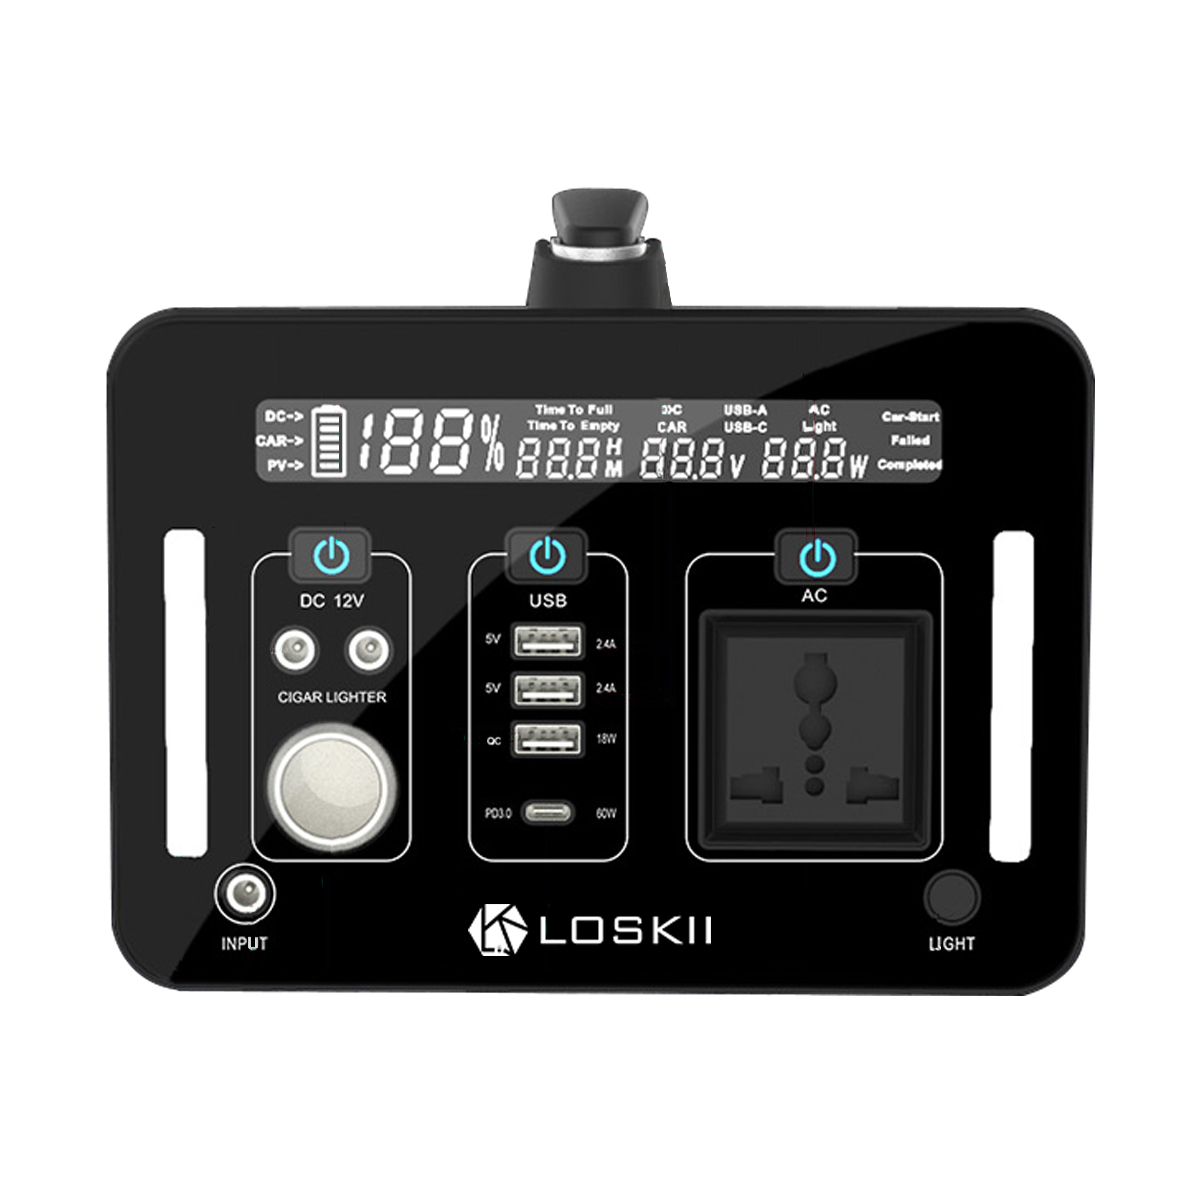 Find Loskii LK-PS32 Portable Outdoor Power Station Battery Generator 100-240V 270000mAh/1000Wh Camping Solar Generator Emergency Energy Supply LCD Display for Outdoor Camping for Sale on Gipsybee.com with cryptocurrencies